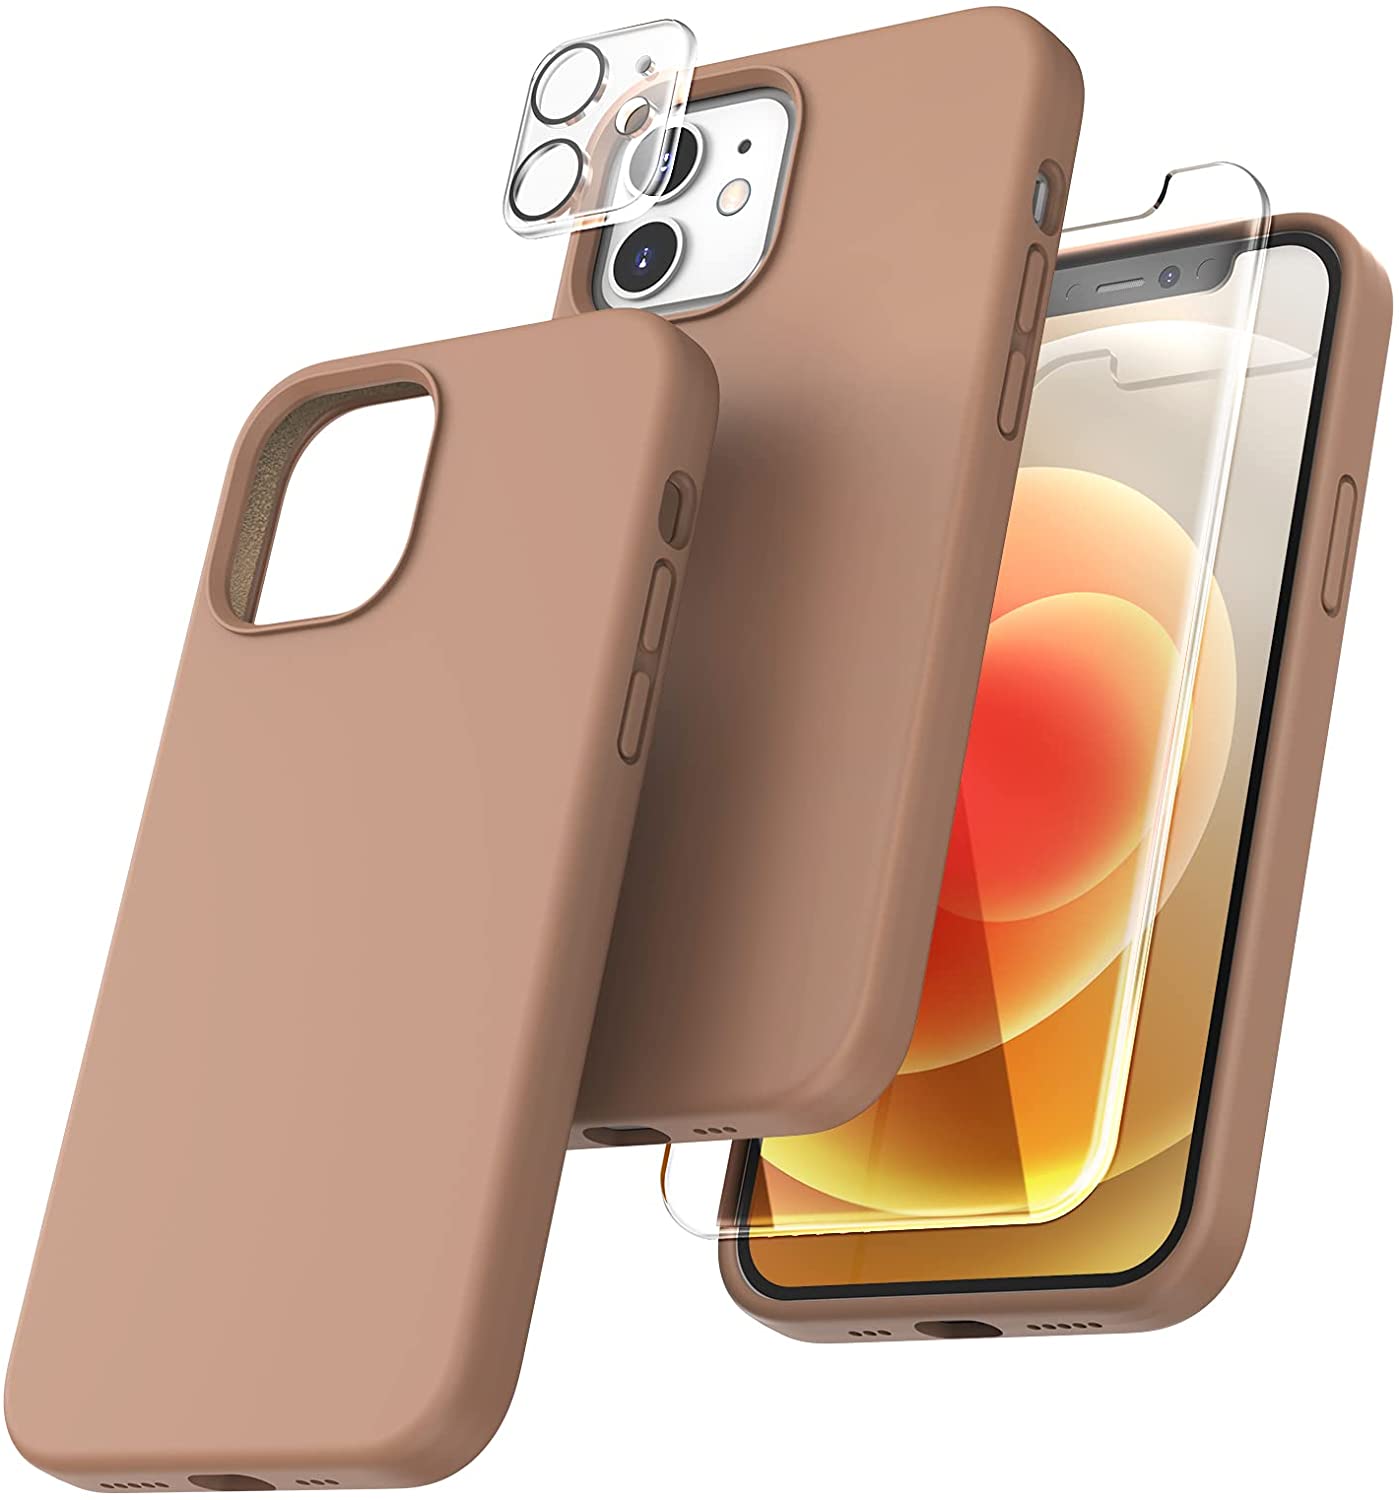 TOCOL [5 in 1] for iPhone 12 Case, for iPhone 12 Pro Case, with 2 Pack Screen Protector + 2 Pack Camera Lens Protector, Silicone Shockproof Phone Case [Anti-Scratch] [Drop Protection], Brown